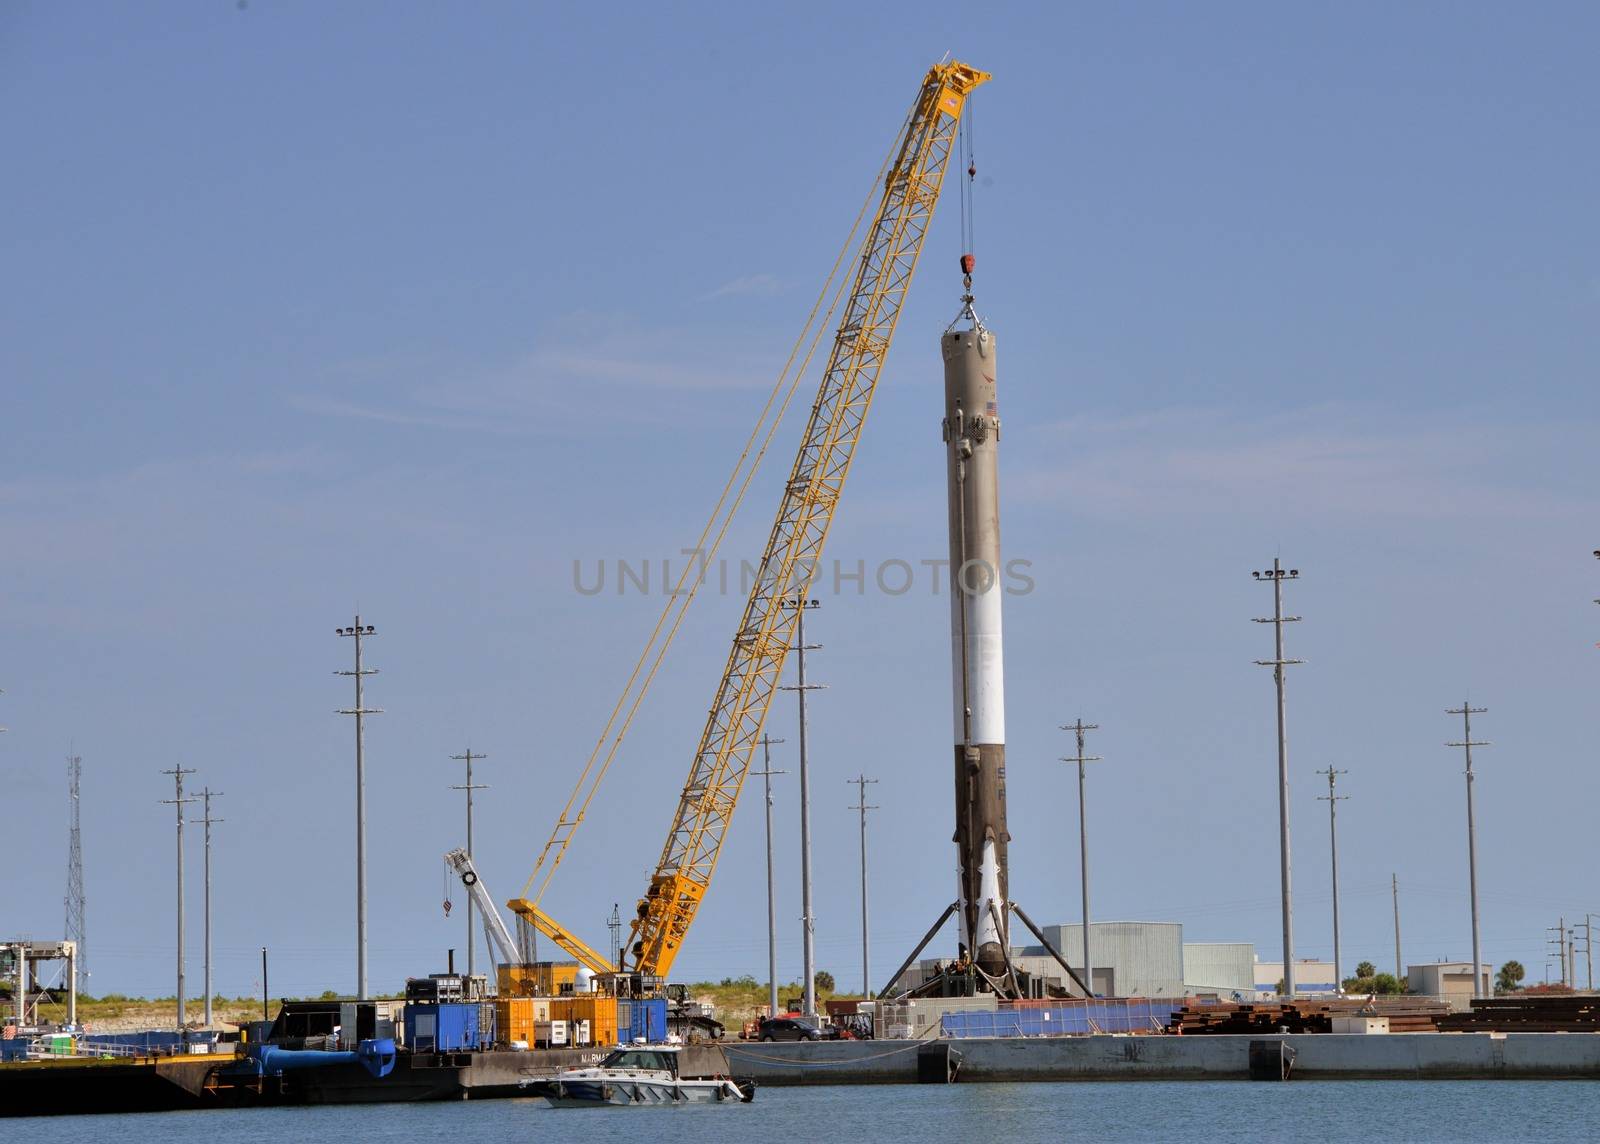 UNITED STATES, Port Canaveral: The first stage of a SpaceX Falcon 9 rocket is seen on the drone ship 'Of course I still love you' docked at Port Canaveral, on April 12, 2016, after its successful landing in the Atlantic Ocean.